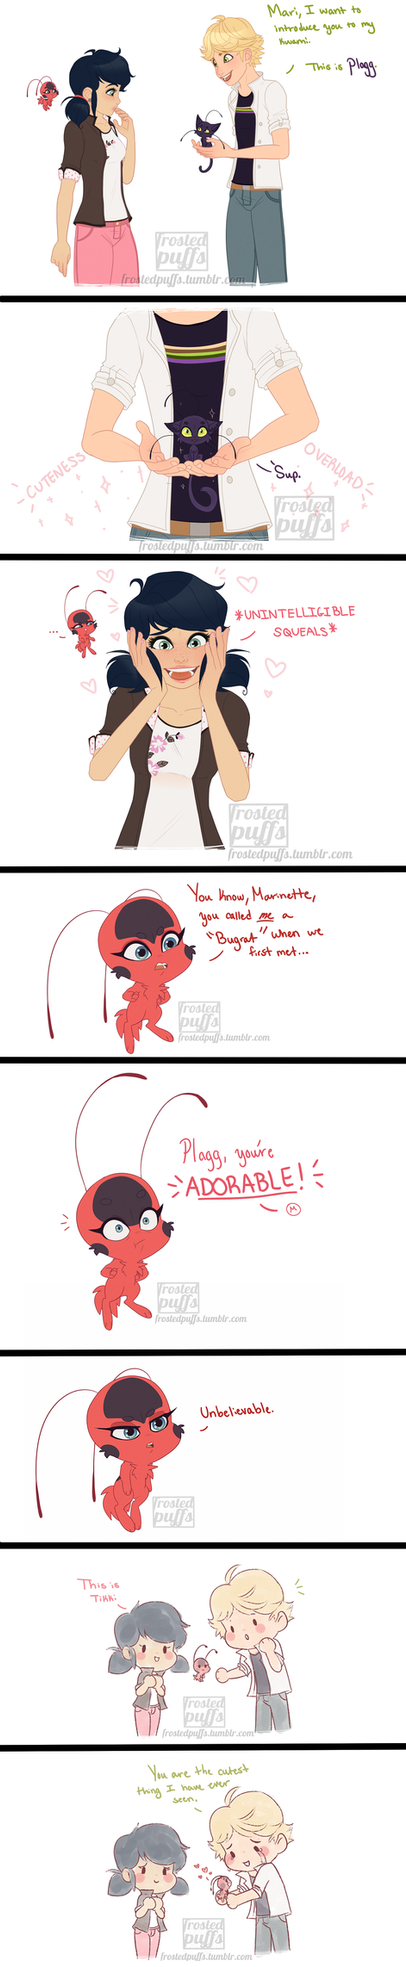 Kwami Introduction by frostedpuffs on DeviantArt